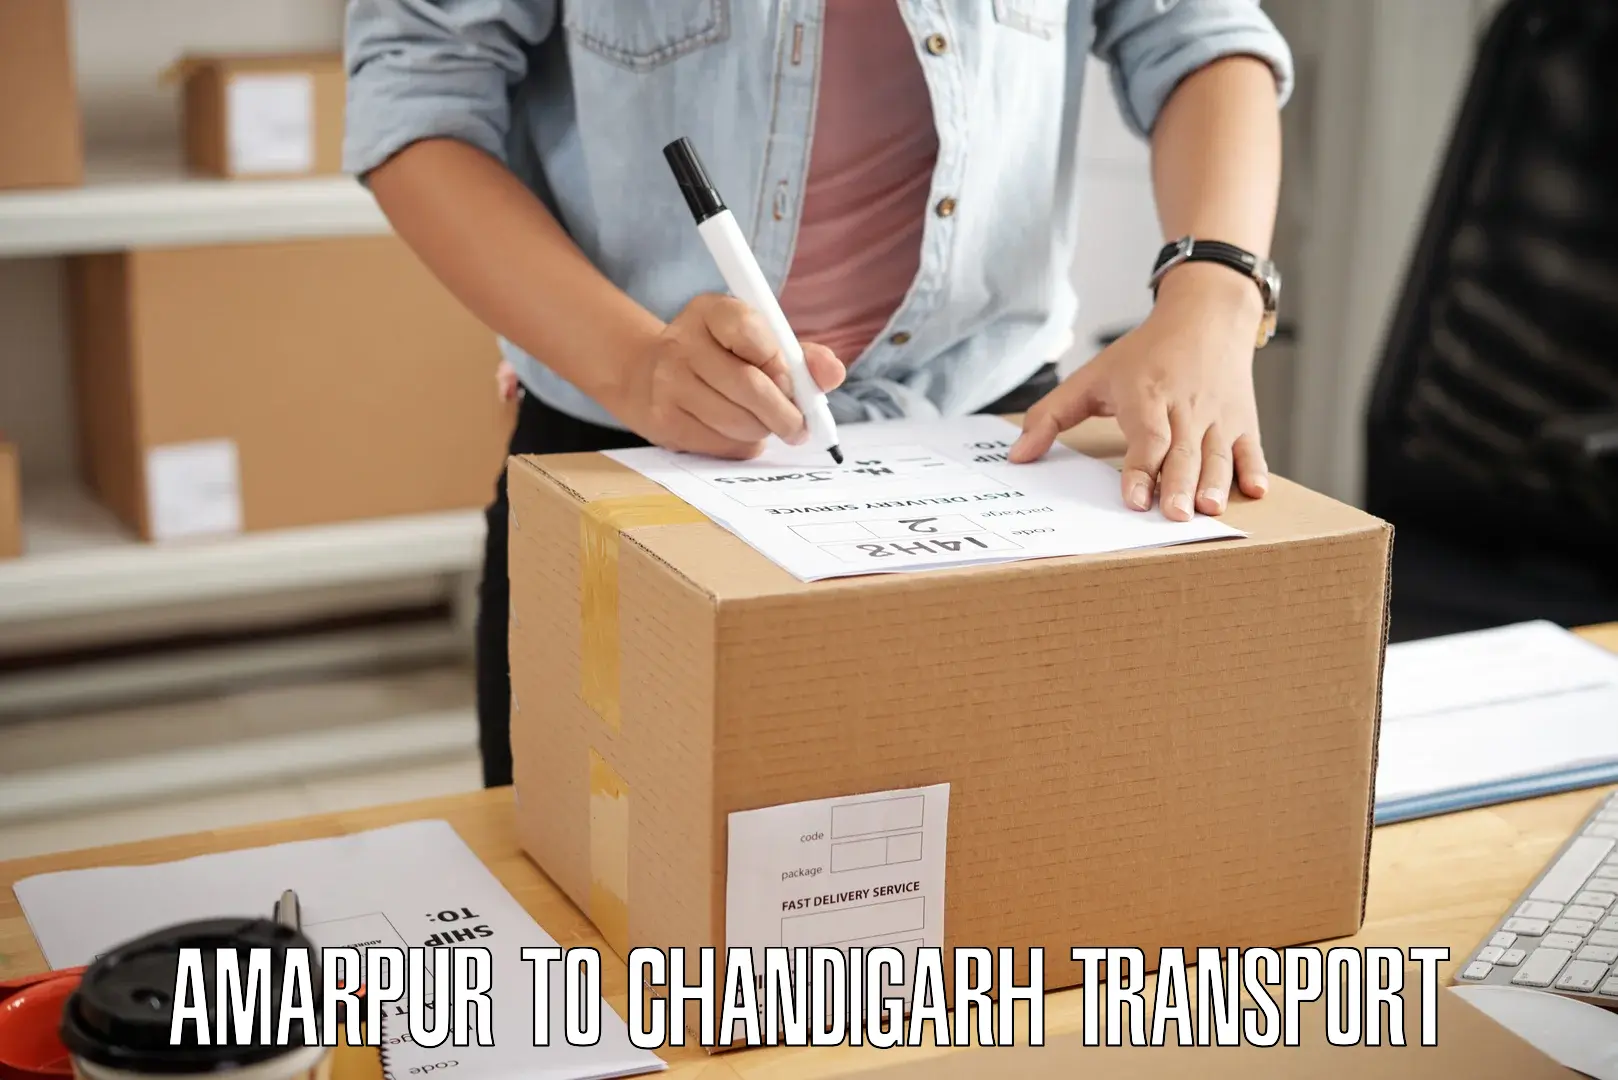 Delivery service Amarpur to Chandigarh